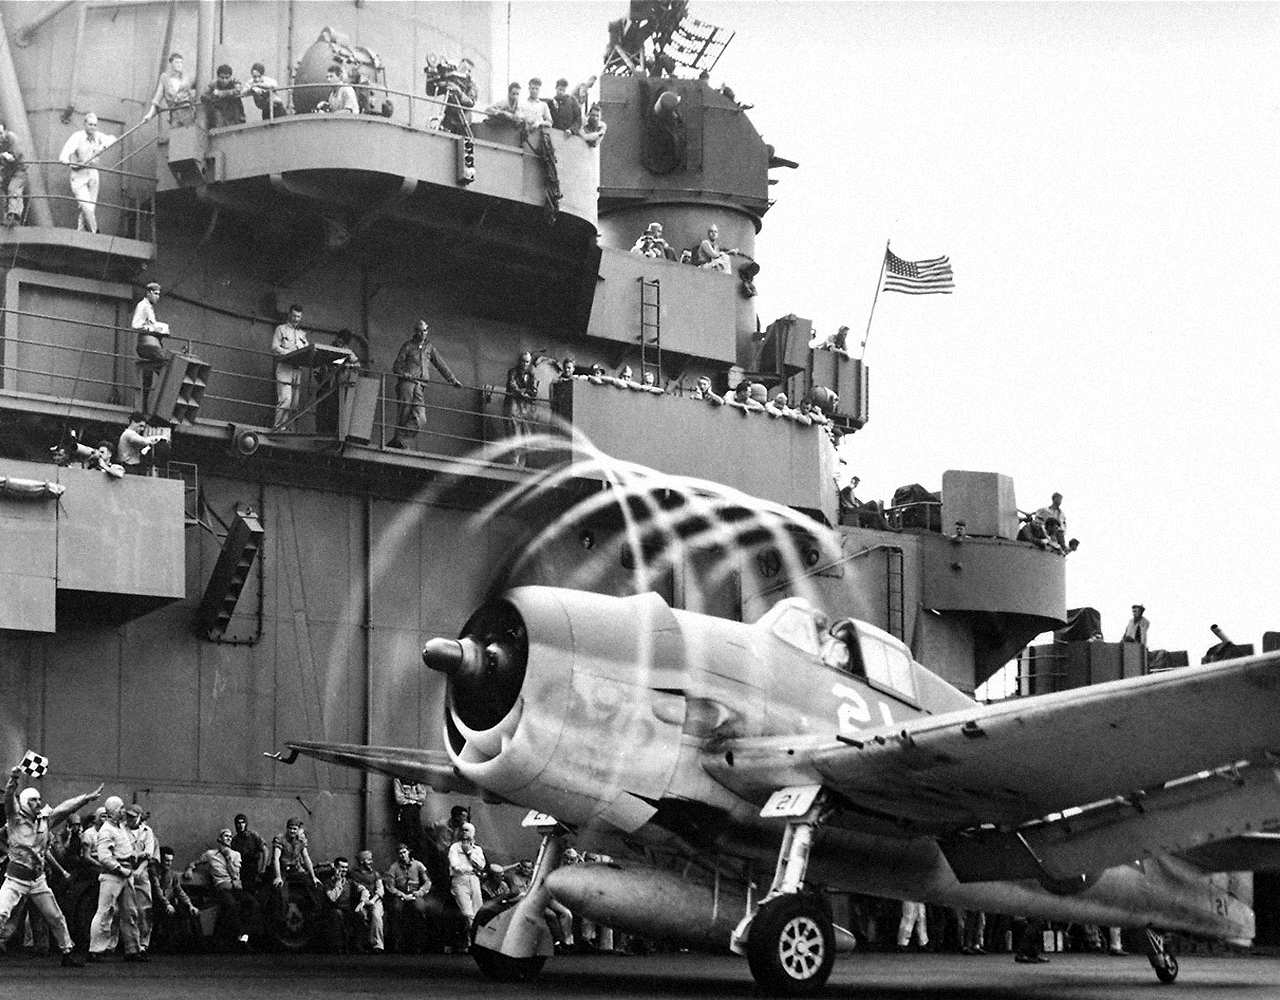 High humidity creates visible propeller tip vortices as this Grumman F6F Hellcat prepares to takeoff from an Essex-class aircraft carrier. (U.S. Navy)